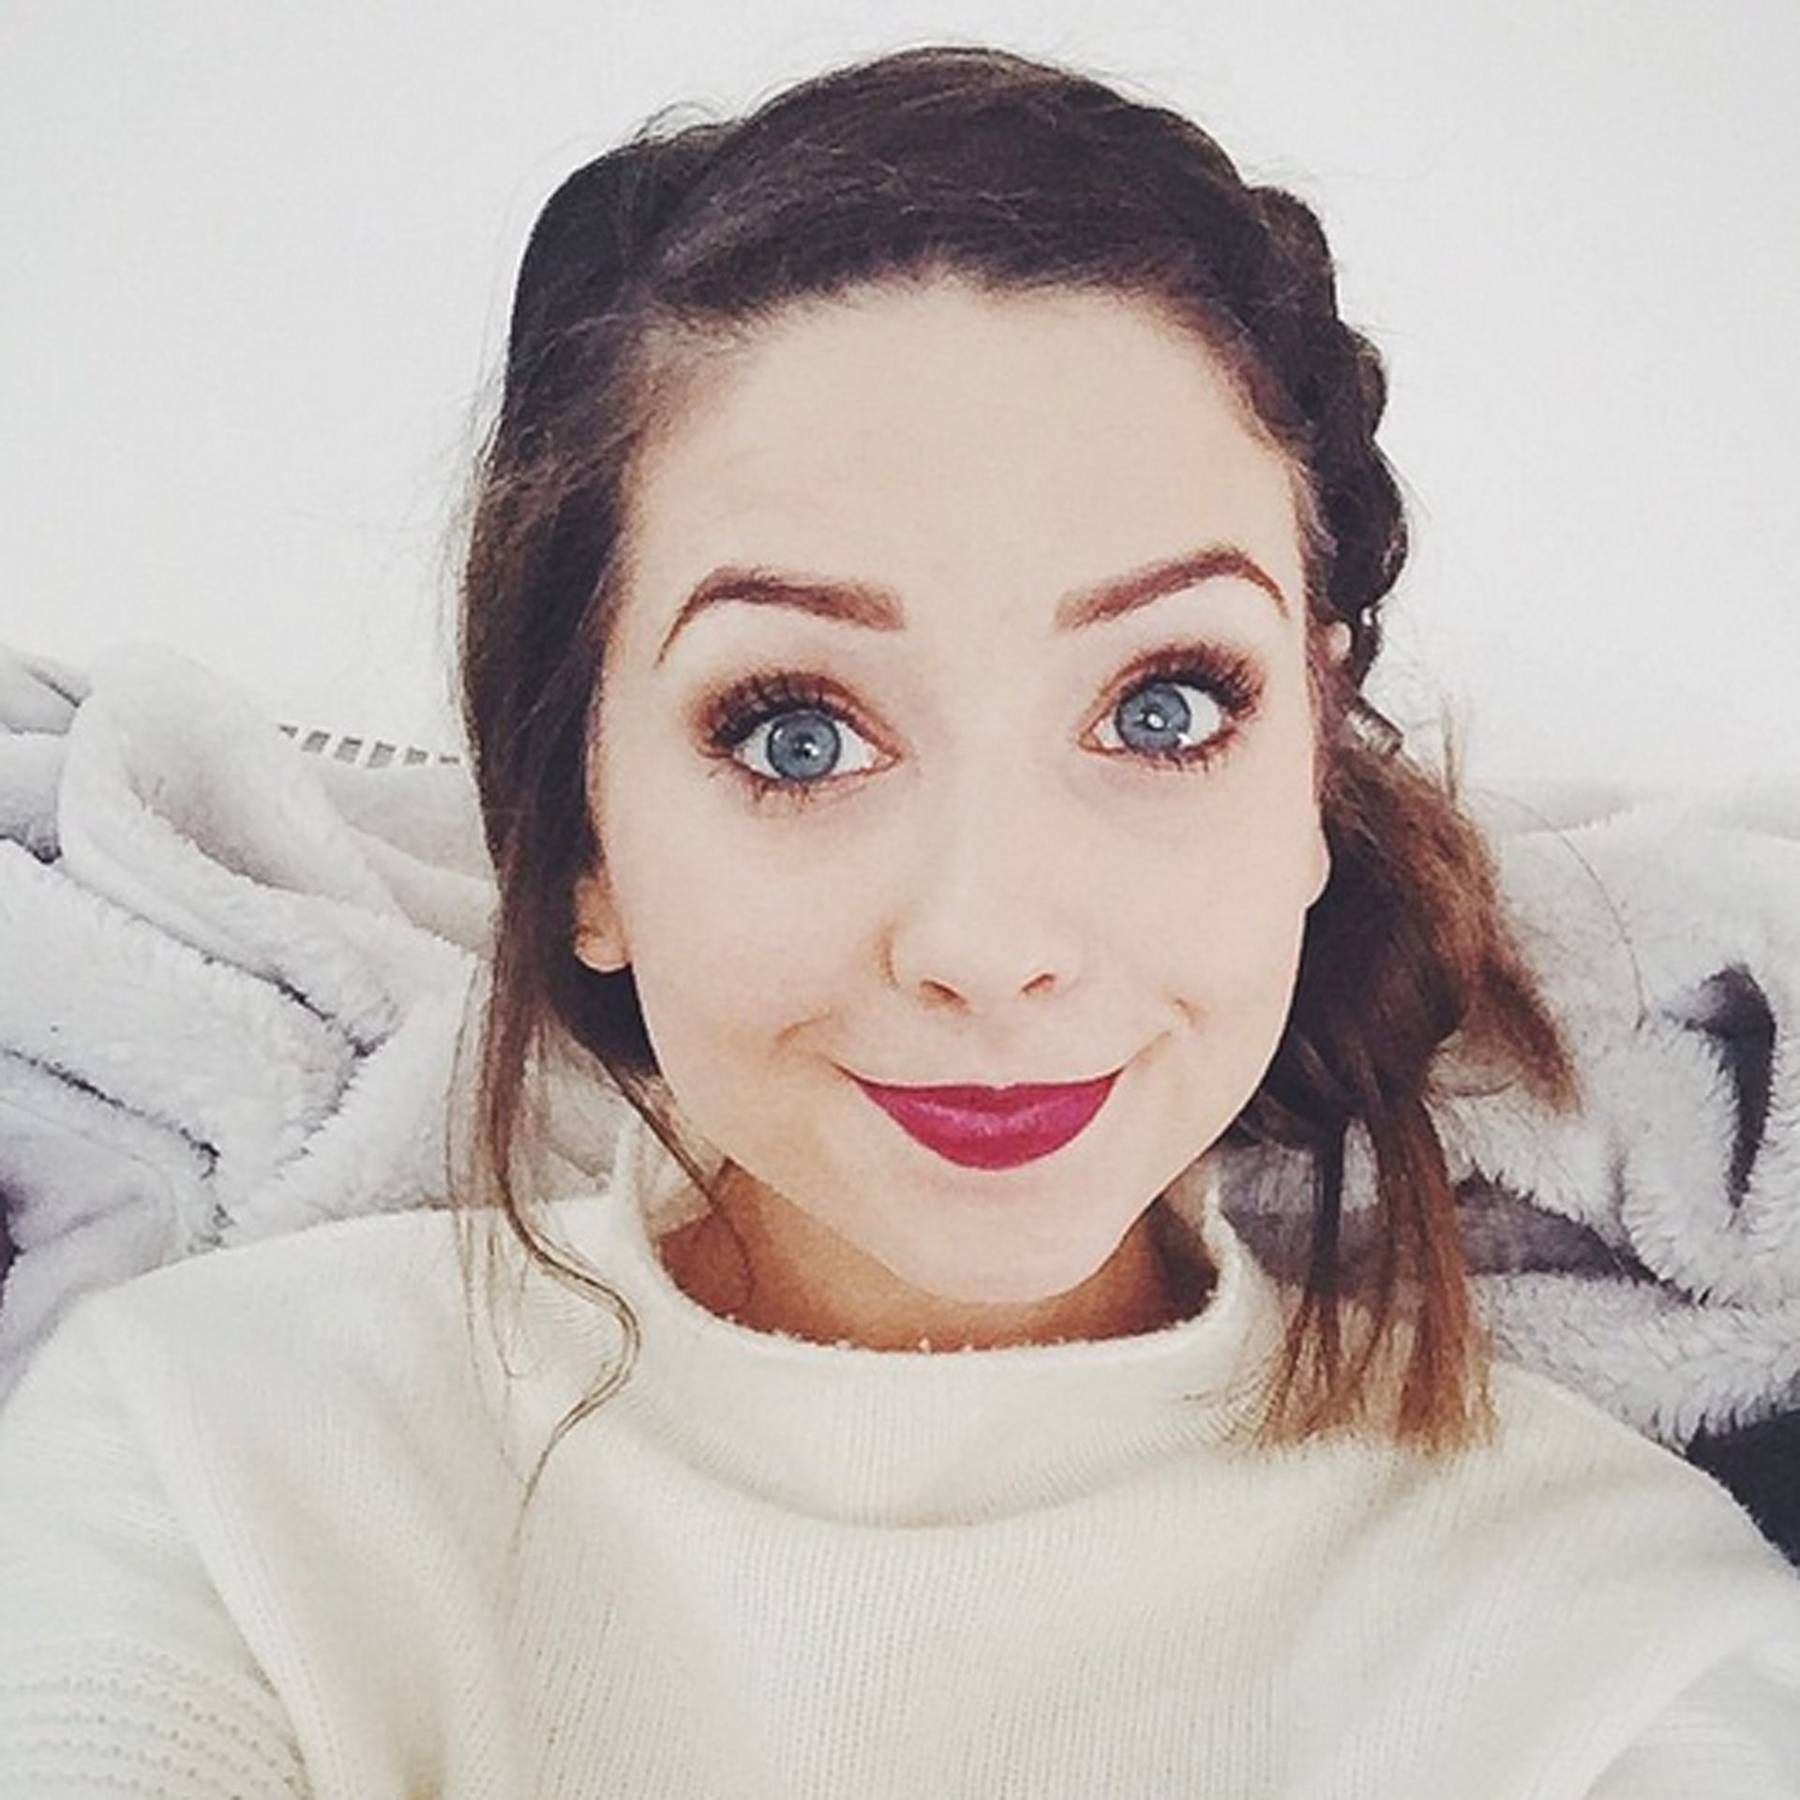 Zoella Anxiety Disorder Vlog Column Anxiety Video And Advice